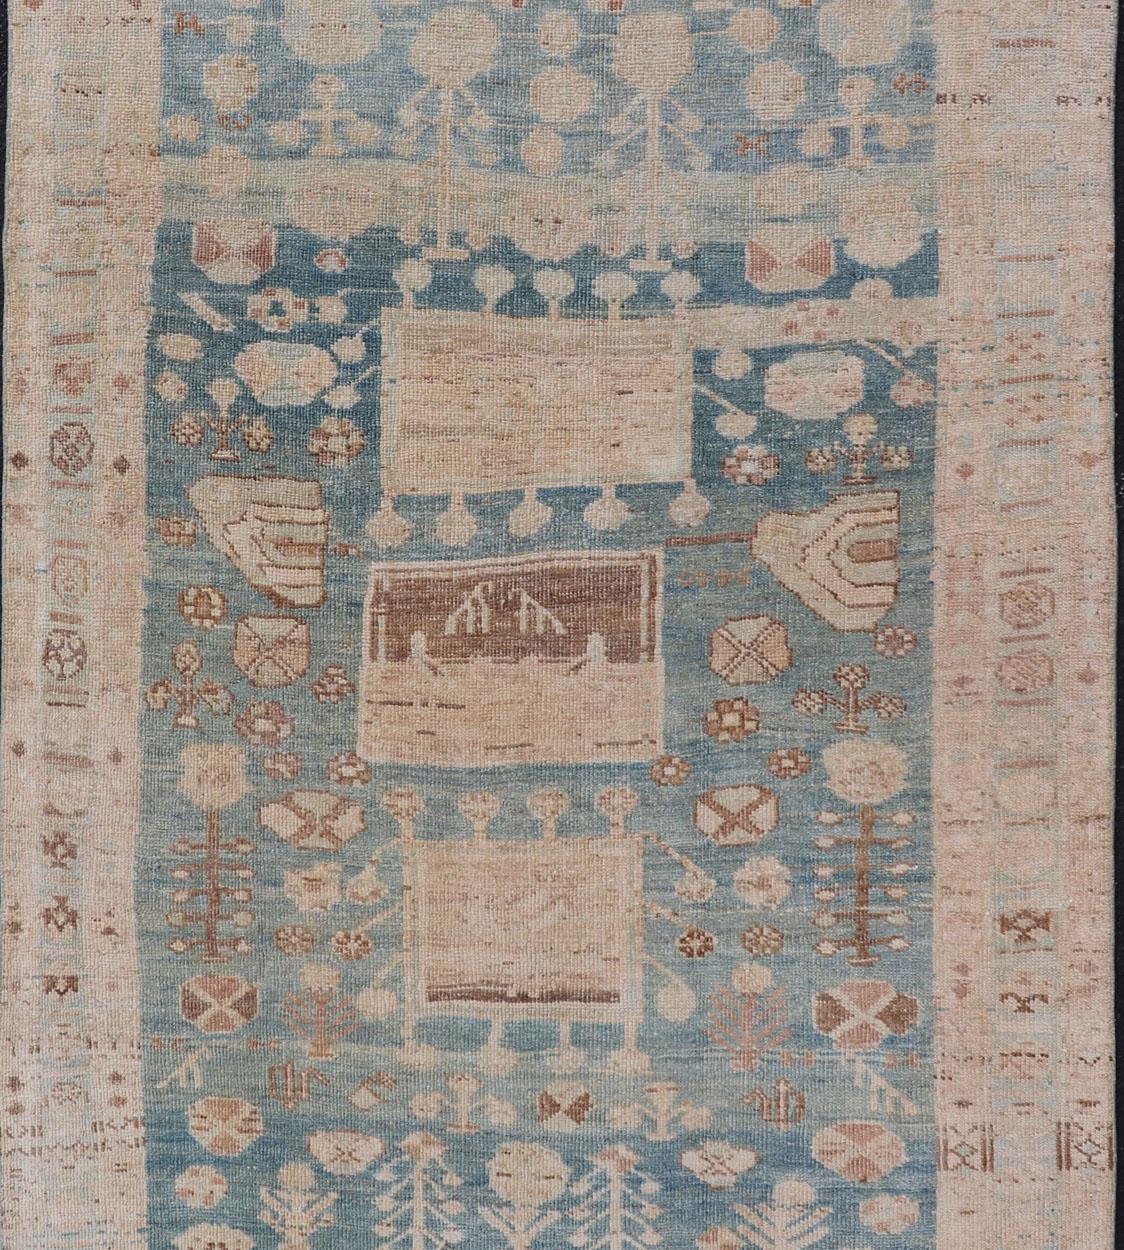 Persian Kurdish Antique Rug with Tribal Design in Light Blue, Teal, and Cream In Good Condition For Sale In Atlanta, GA